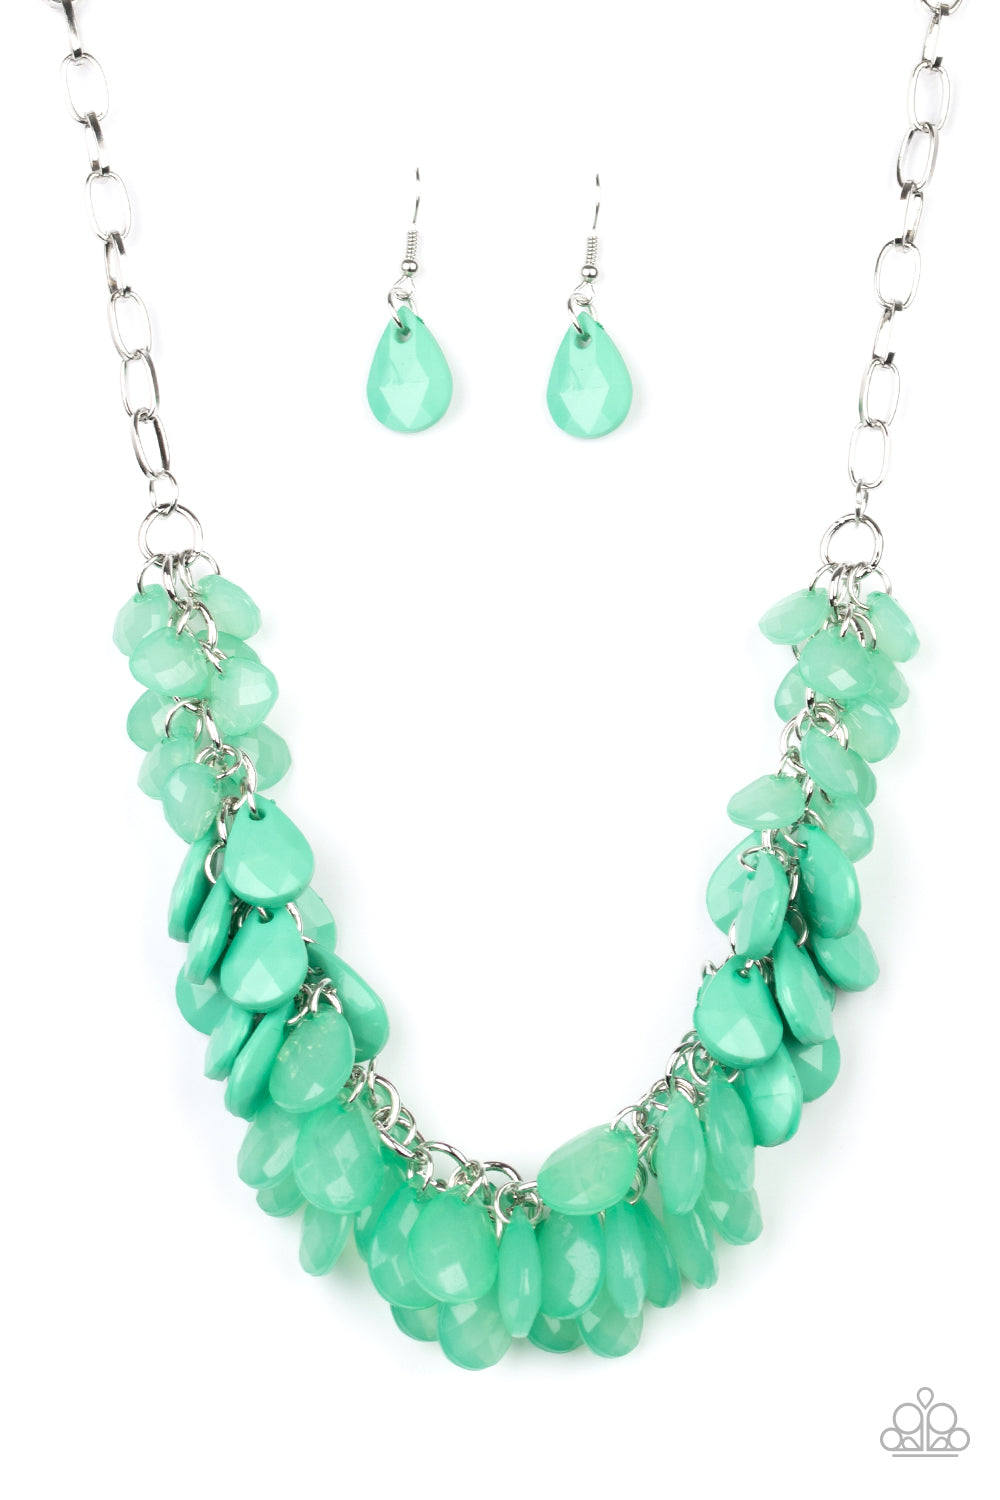 Colorfully Clustered Green Necklace - Paparazzi Accessories  A minty green collection of polished and crystal-like teardrop beads cluster along the bottom of a shimmery silver chain, creating a flirtatious fringe below the collar. Features an adjustable clasp closure.   All Paparazzi Accessories are lead free and nickel free!  Sold as one individual necklace. Includes one pair of matching earrings.